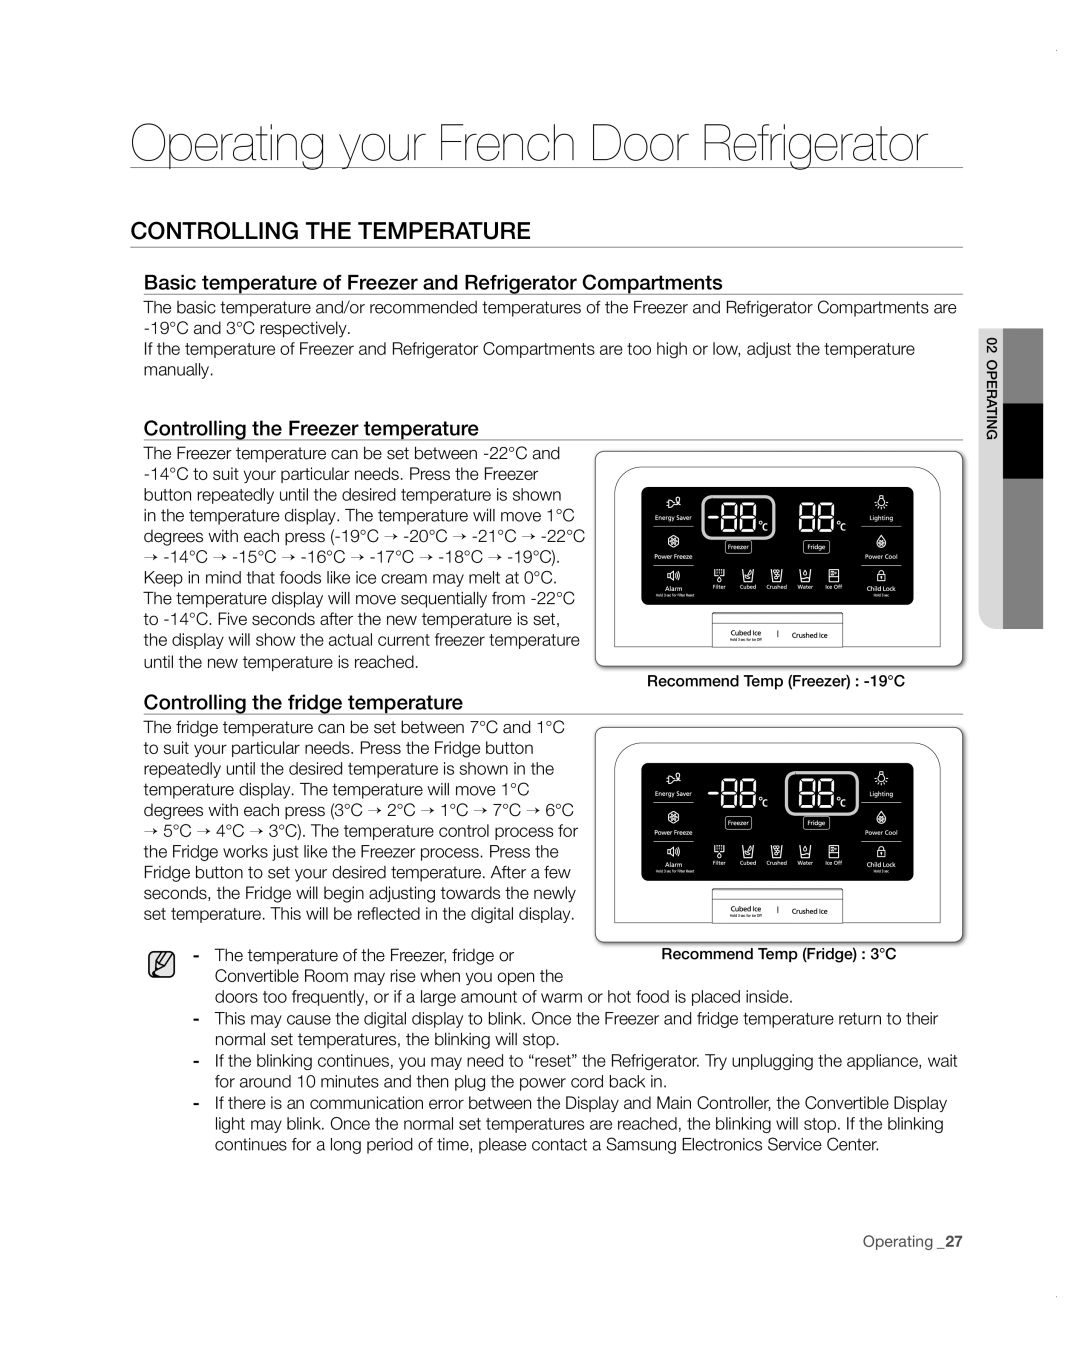 Samsung RF4287HARS user manual Operating your French Door Refrigerator, controlling the temperature 